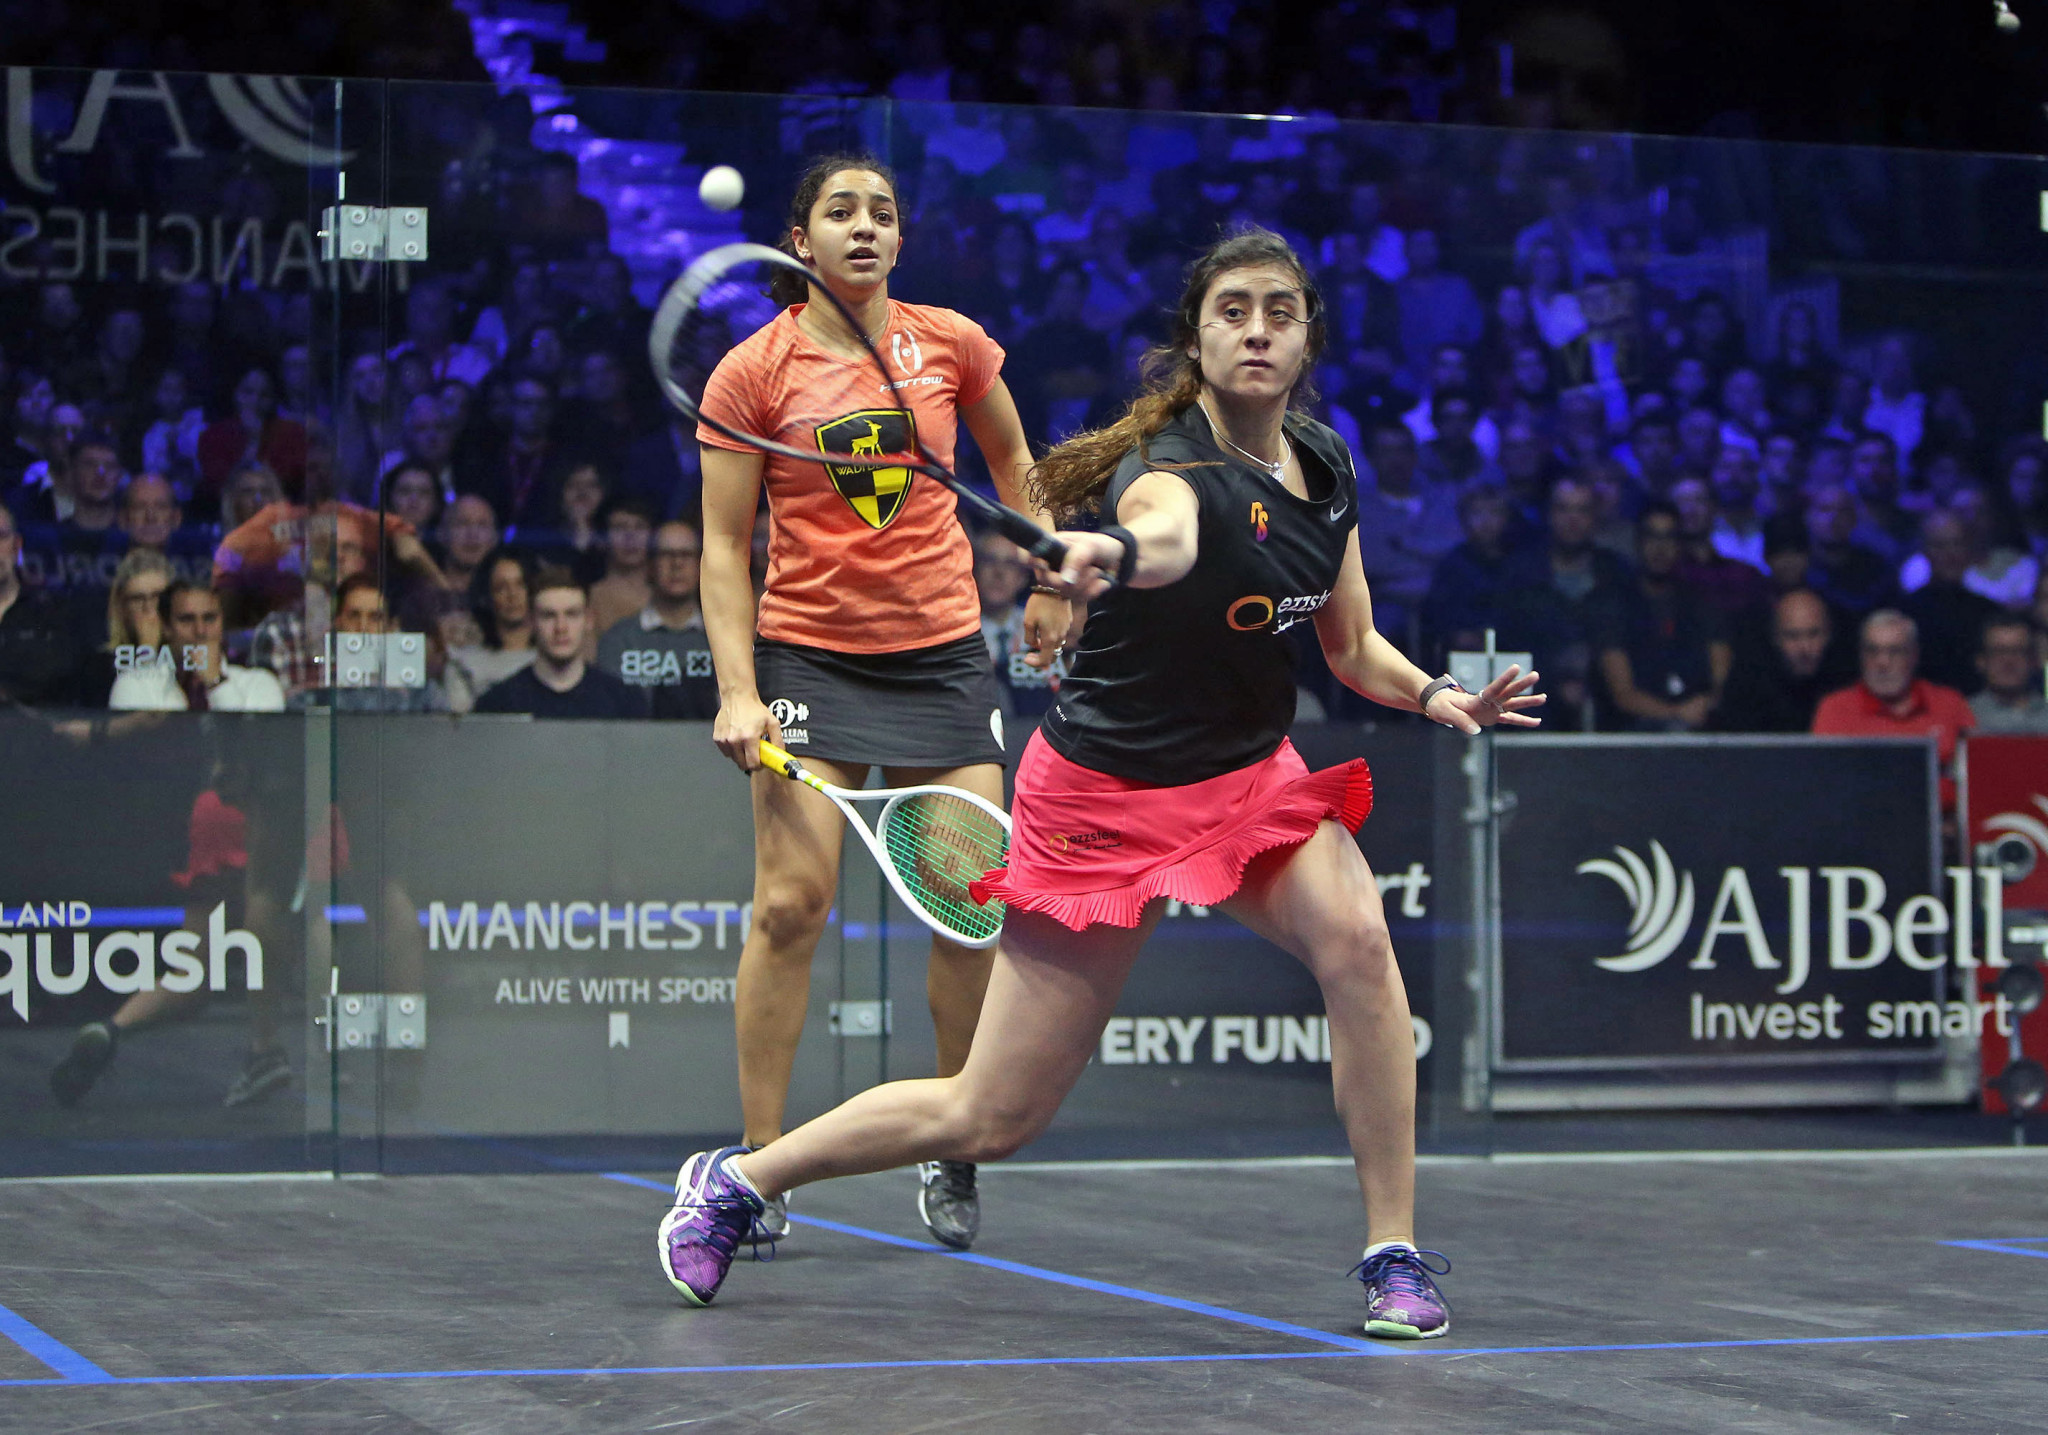 World Squash Library launches first collection of World Championships stats